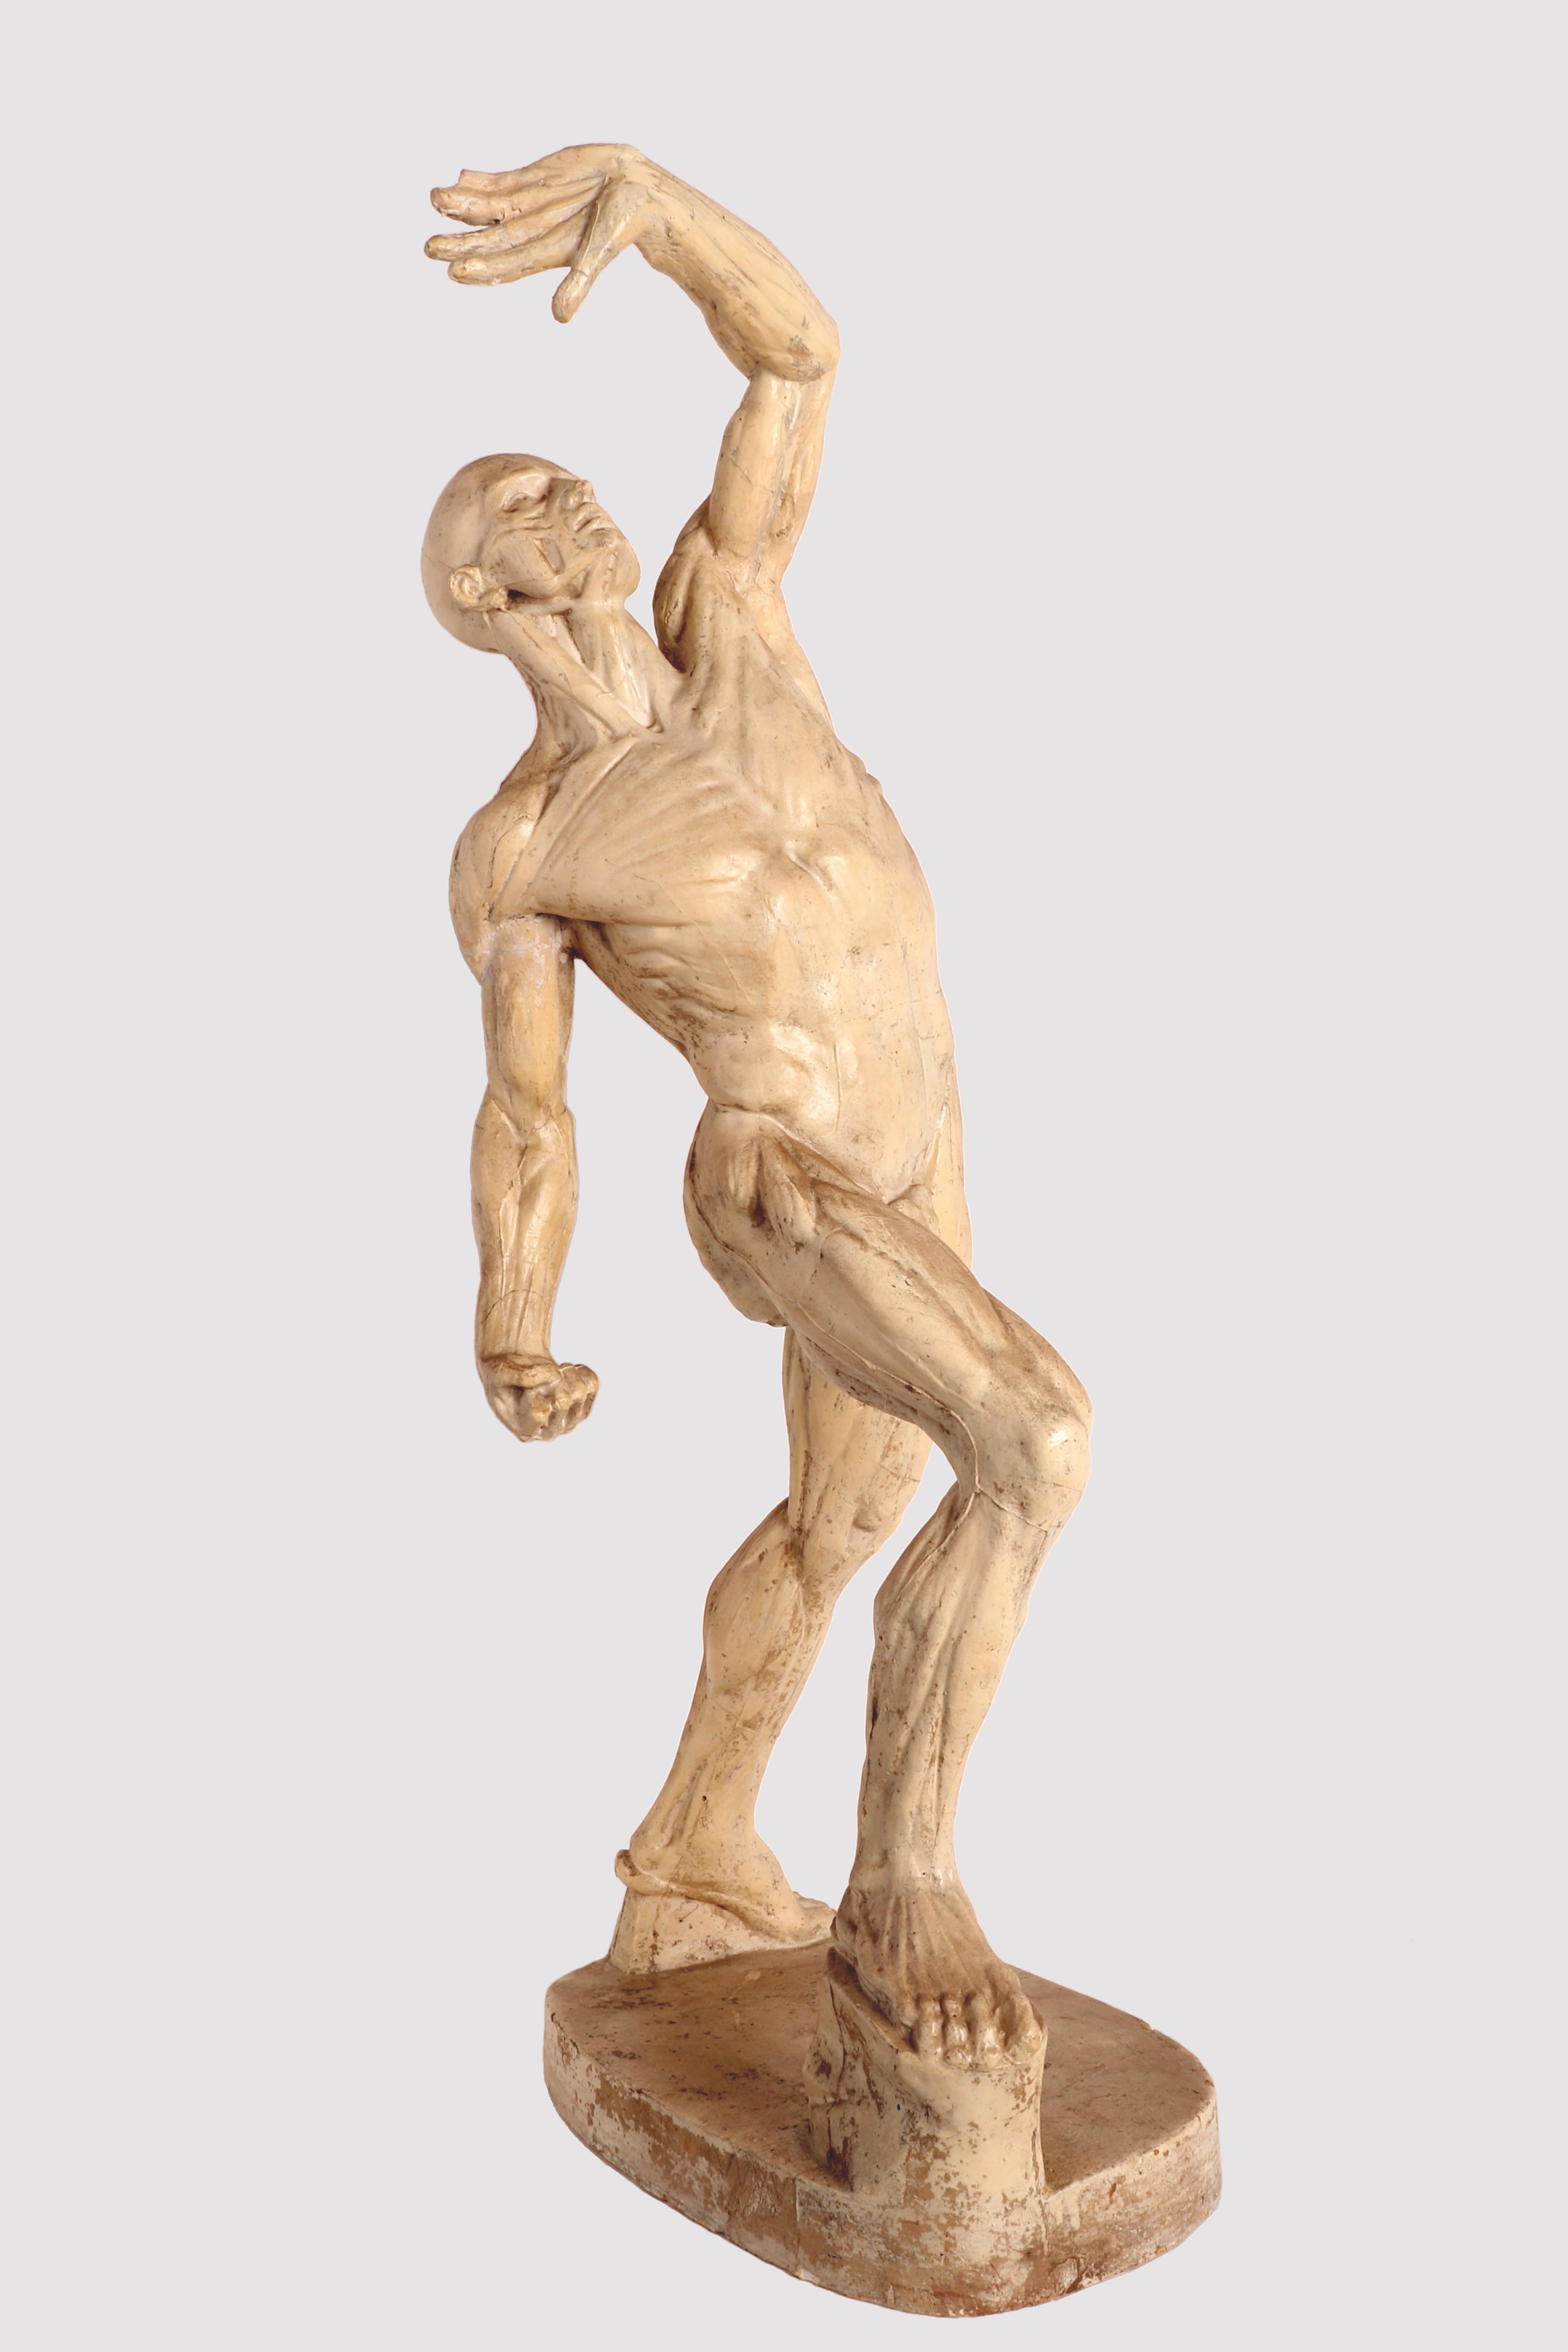 The anatomical sculpture, cast out of plaster, depicts a flayed man standing over an oval base in a classical pose with lifted arm. Anatomical study purpose. Italy circa 1880.